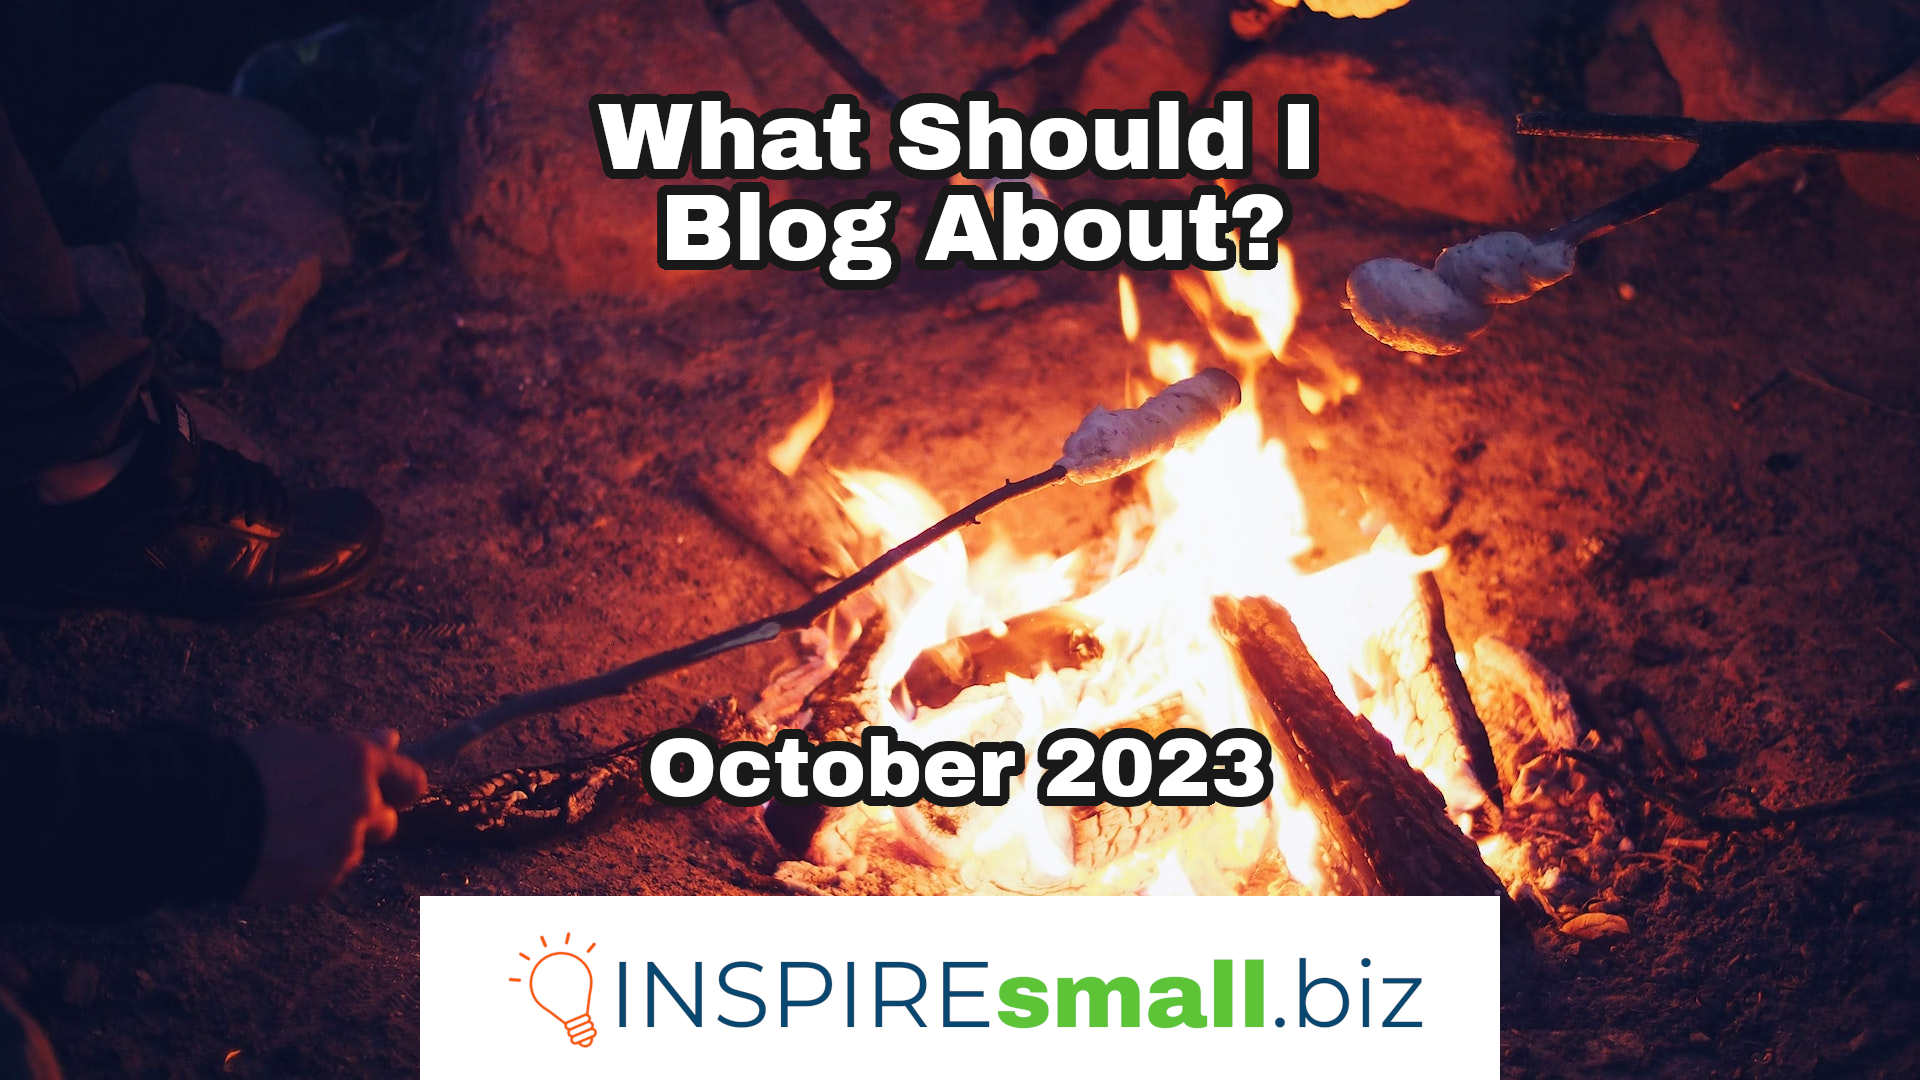 What Should I Blog About? October 2023